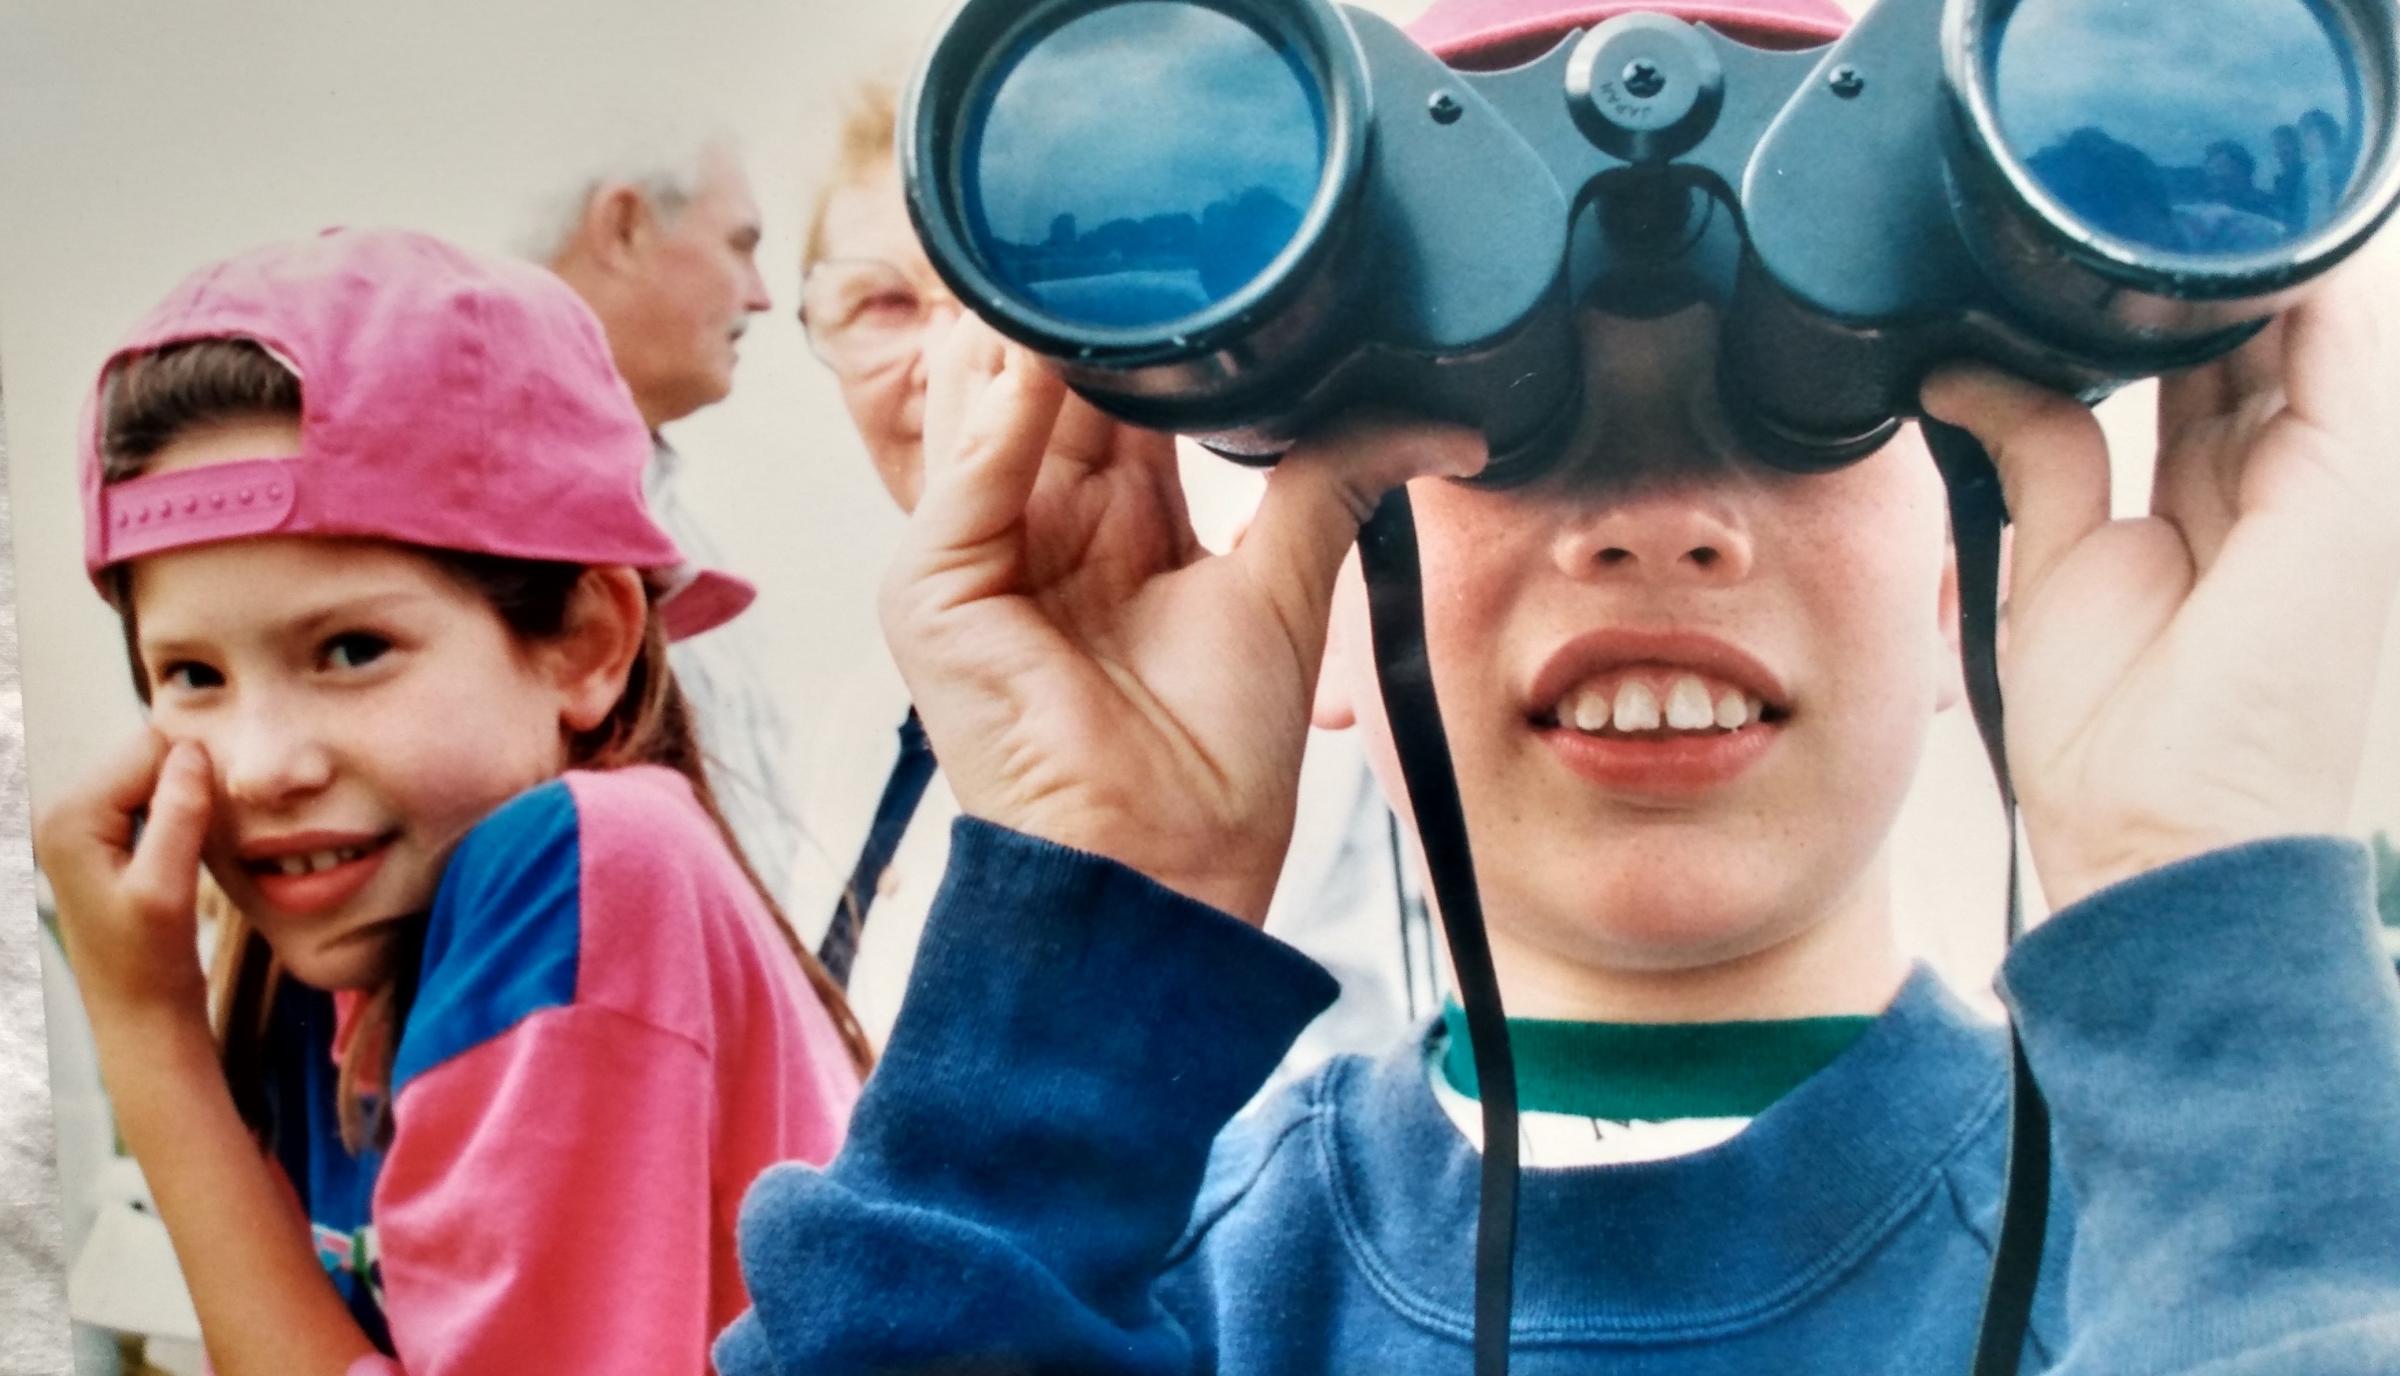 Felicity and James Coll, with binoculars, studying the action from afar in August 1994